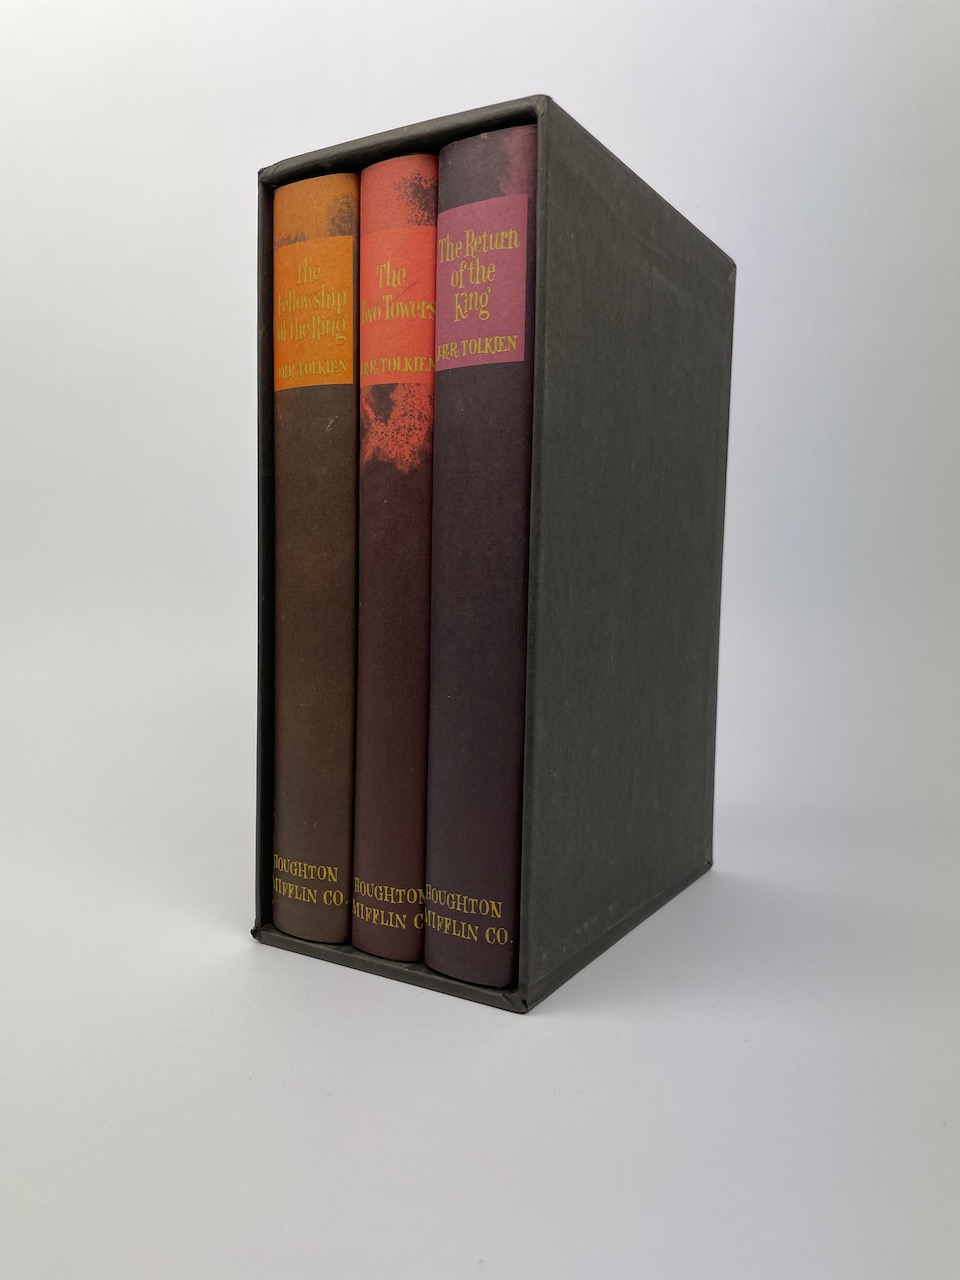 Lord of the Rings, 2nd US Edition in Original Publishers Slipcase and with Dustjackets 1